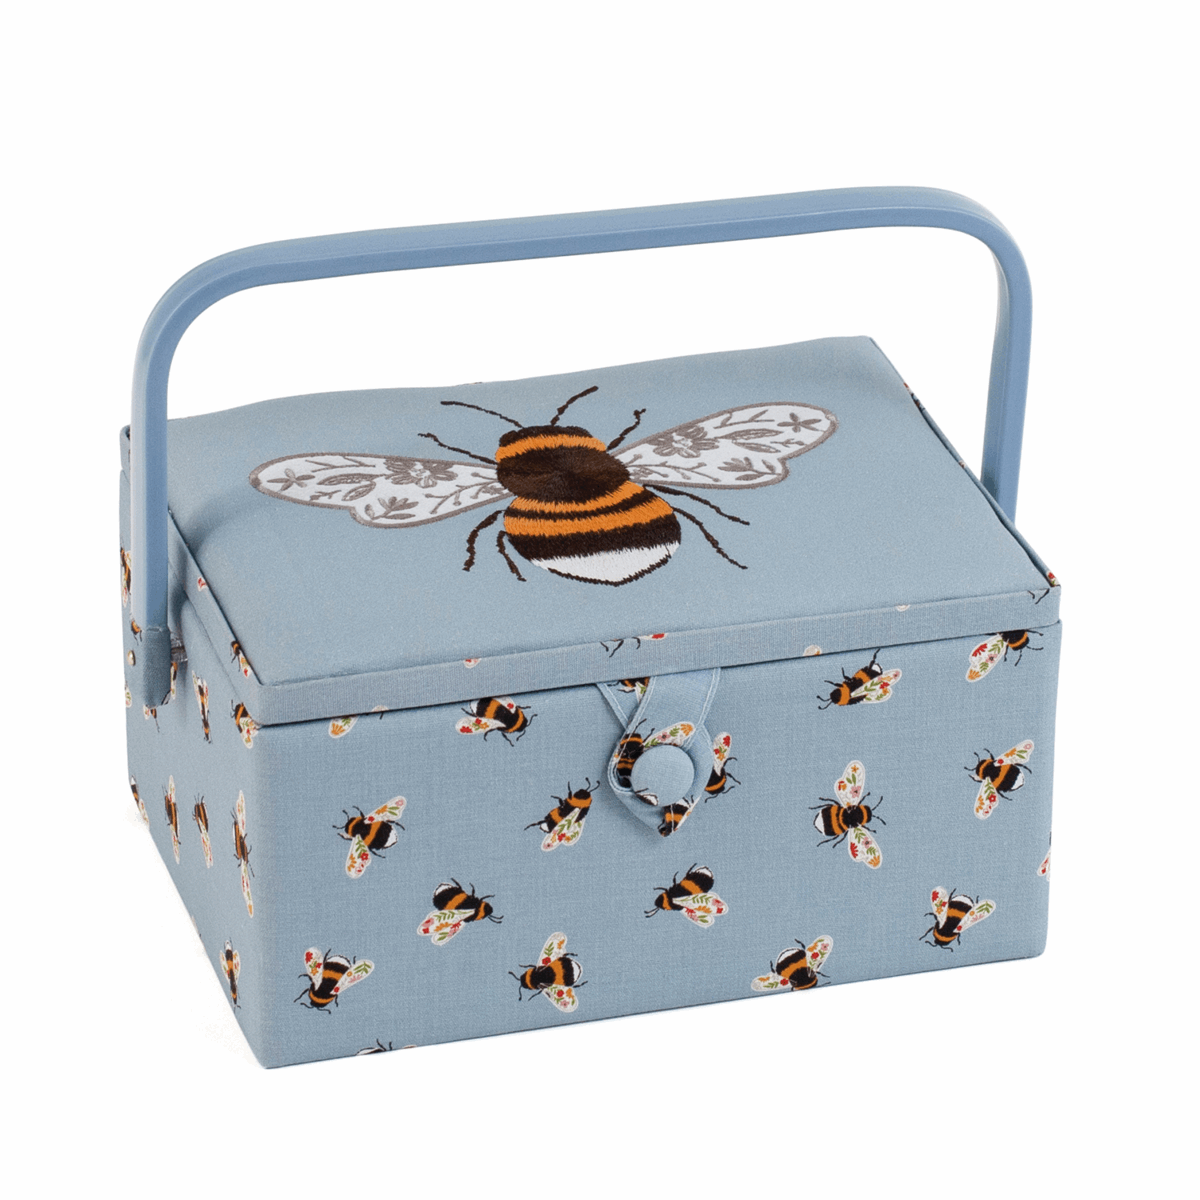 Blue Bees Sewing Box with Embroidered Lid - Medium